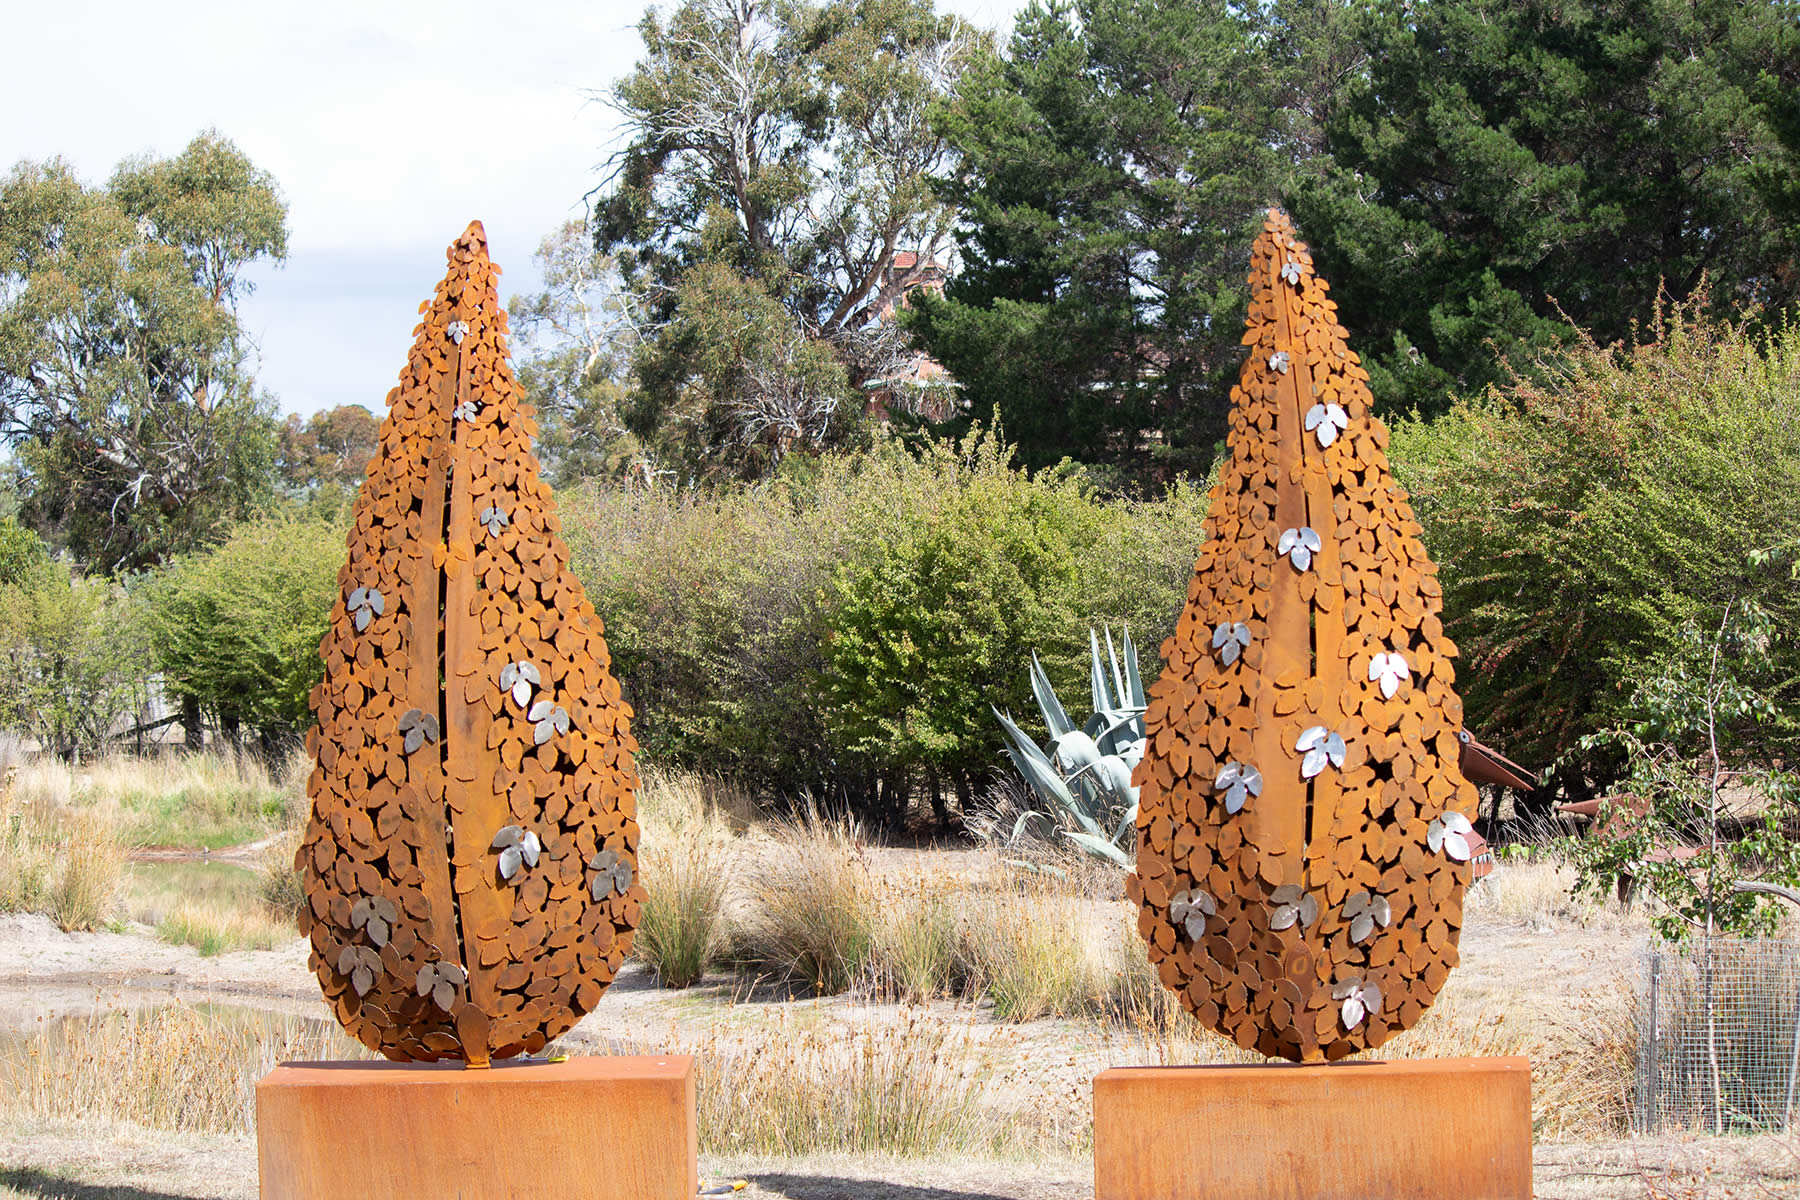 2.4m tall corten steel with stainless steel highlights